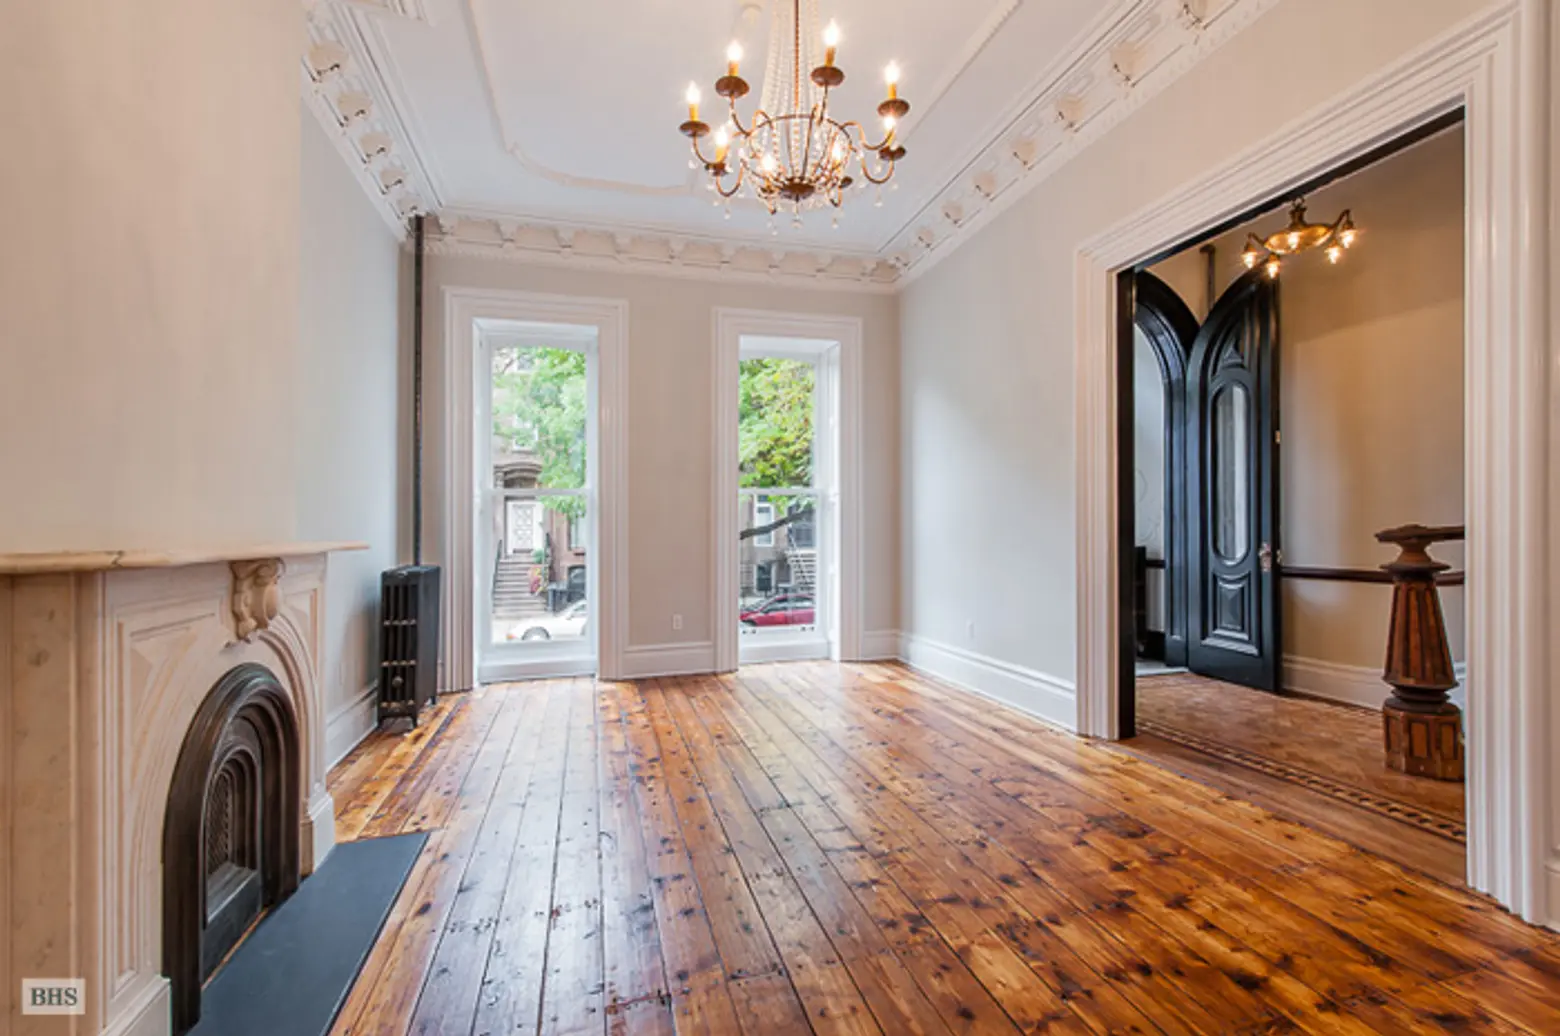 102 gates avenue renovated, renovated clinton hill townhouse, renovated historic home, brooklyn historic home, renovated brooklyn home